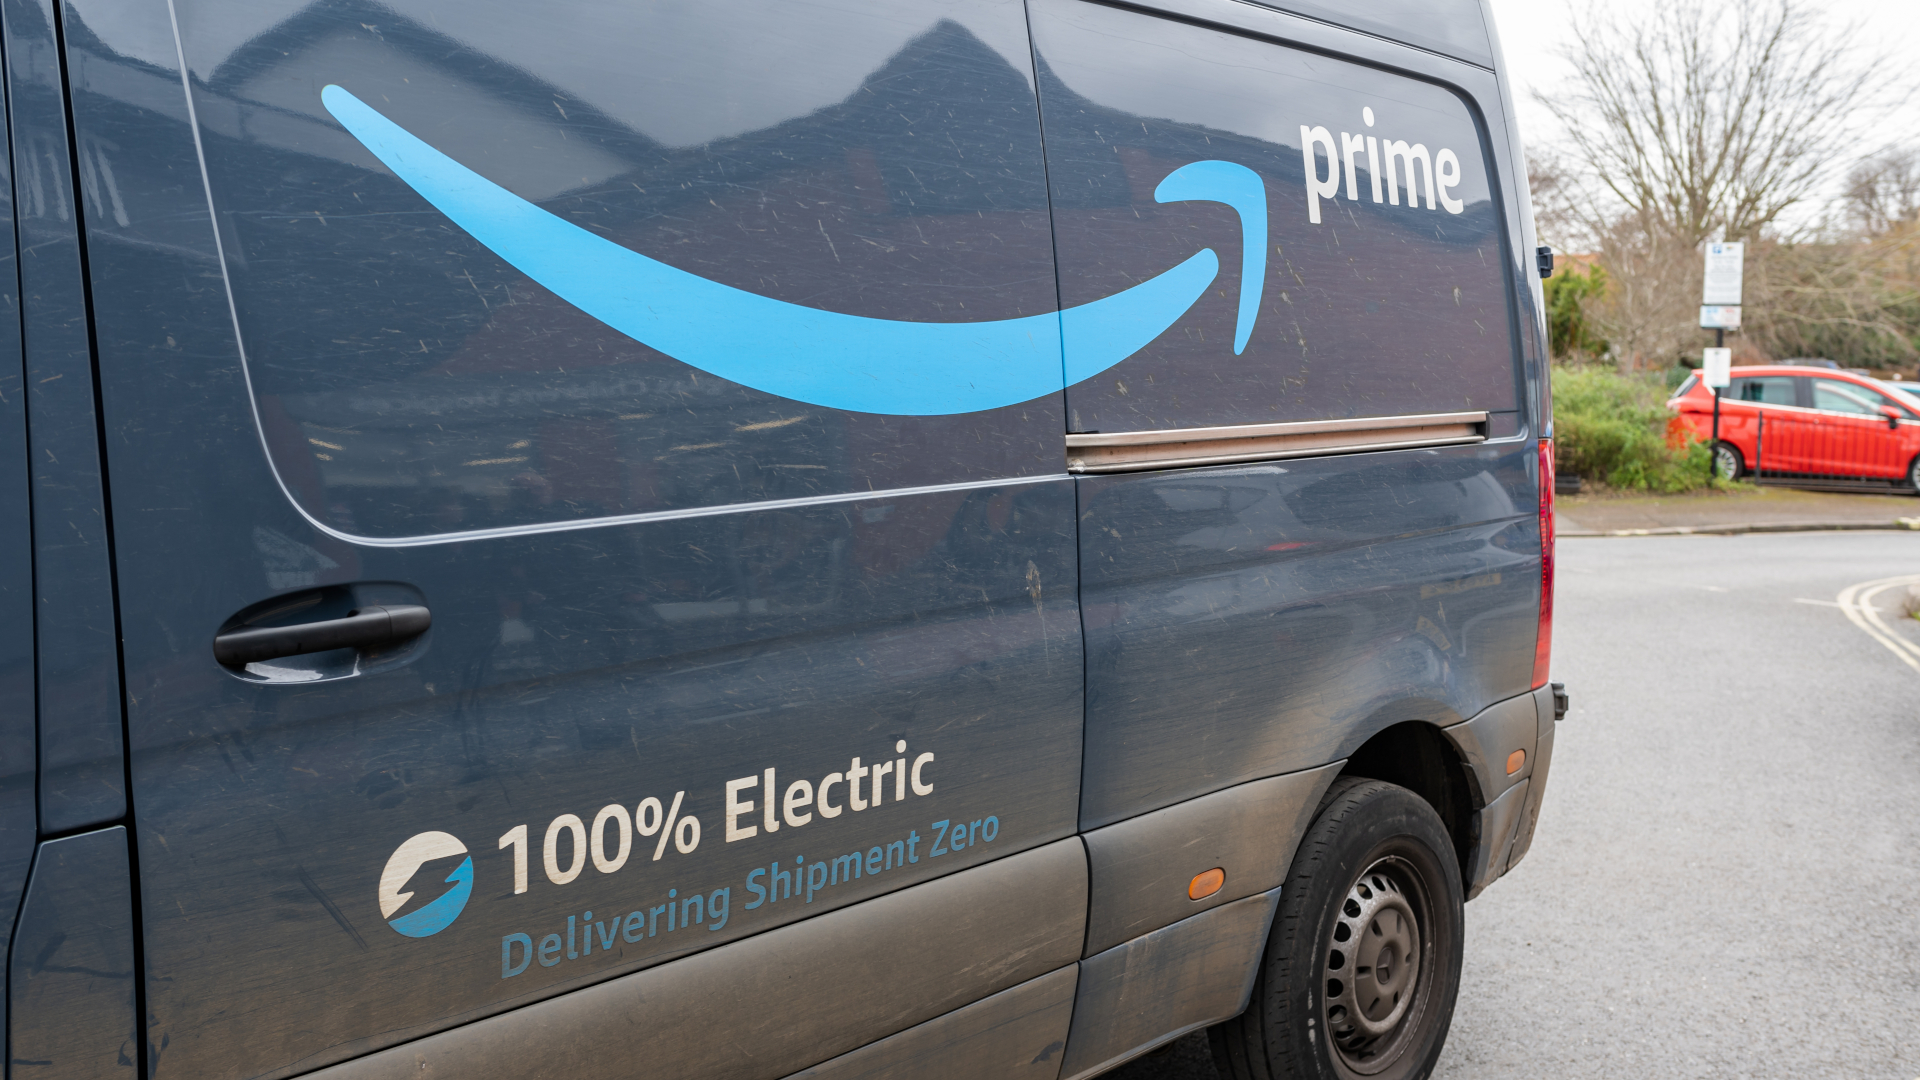 Creating a Fleet of 100,000 Electric Delivery Vehicles